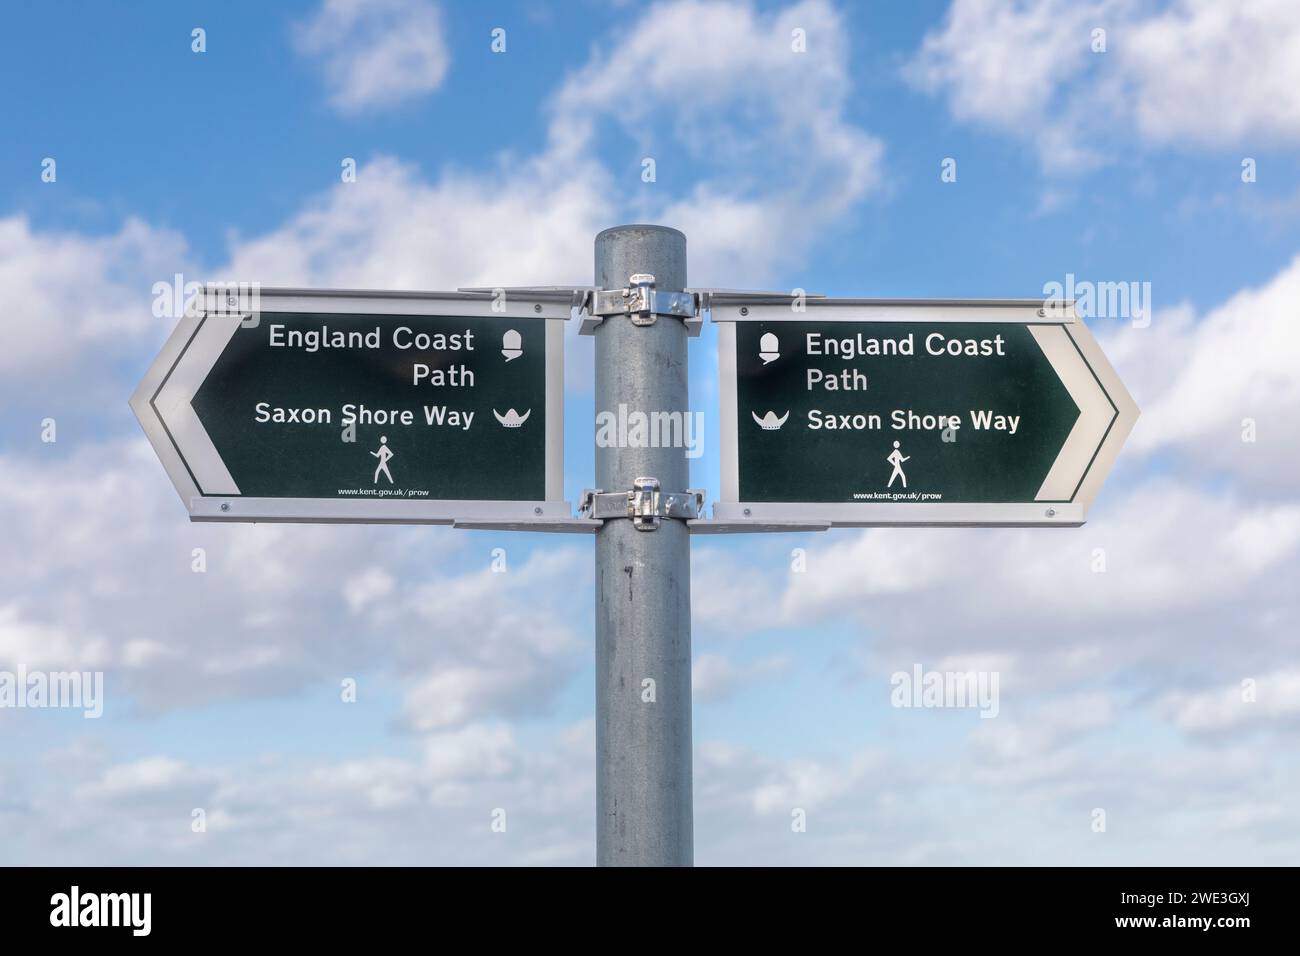 A sign for the England Coast Path and Saxon Shore Way in Herne Bay, Kent, UK Stock Photo